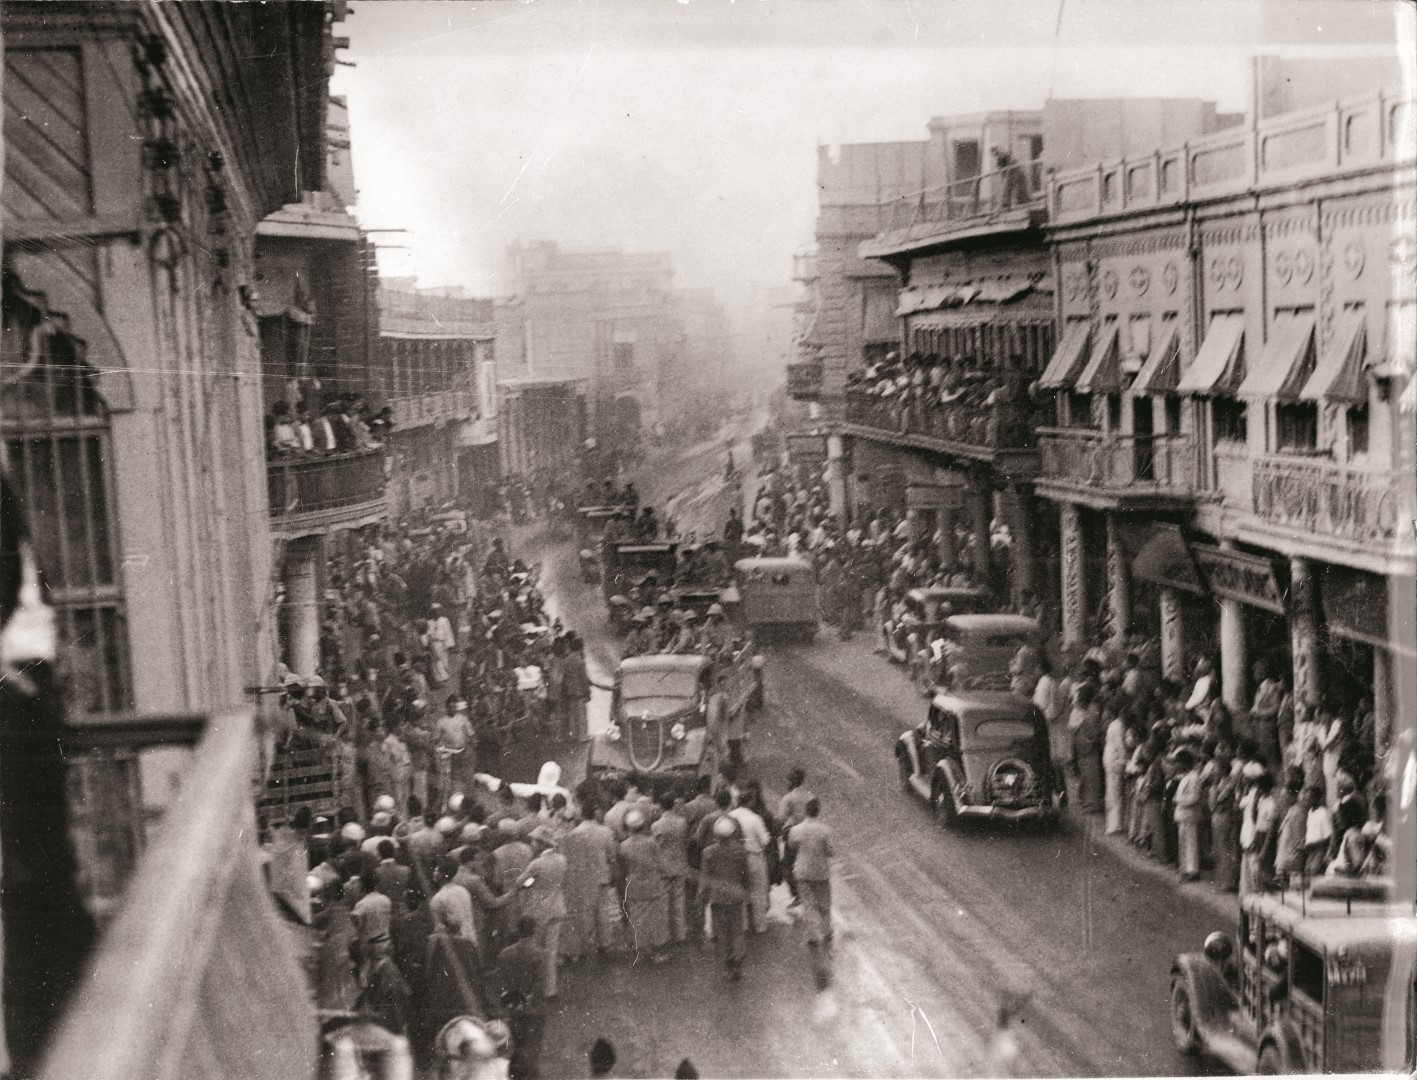 Baghdad at the time of the German-leaning coup. Soldiers are seen riding through the streets in open trucks.